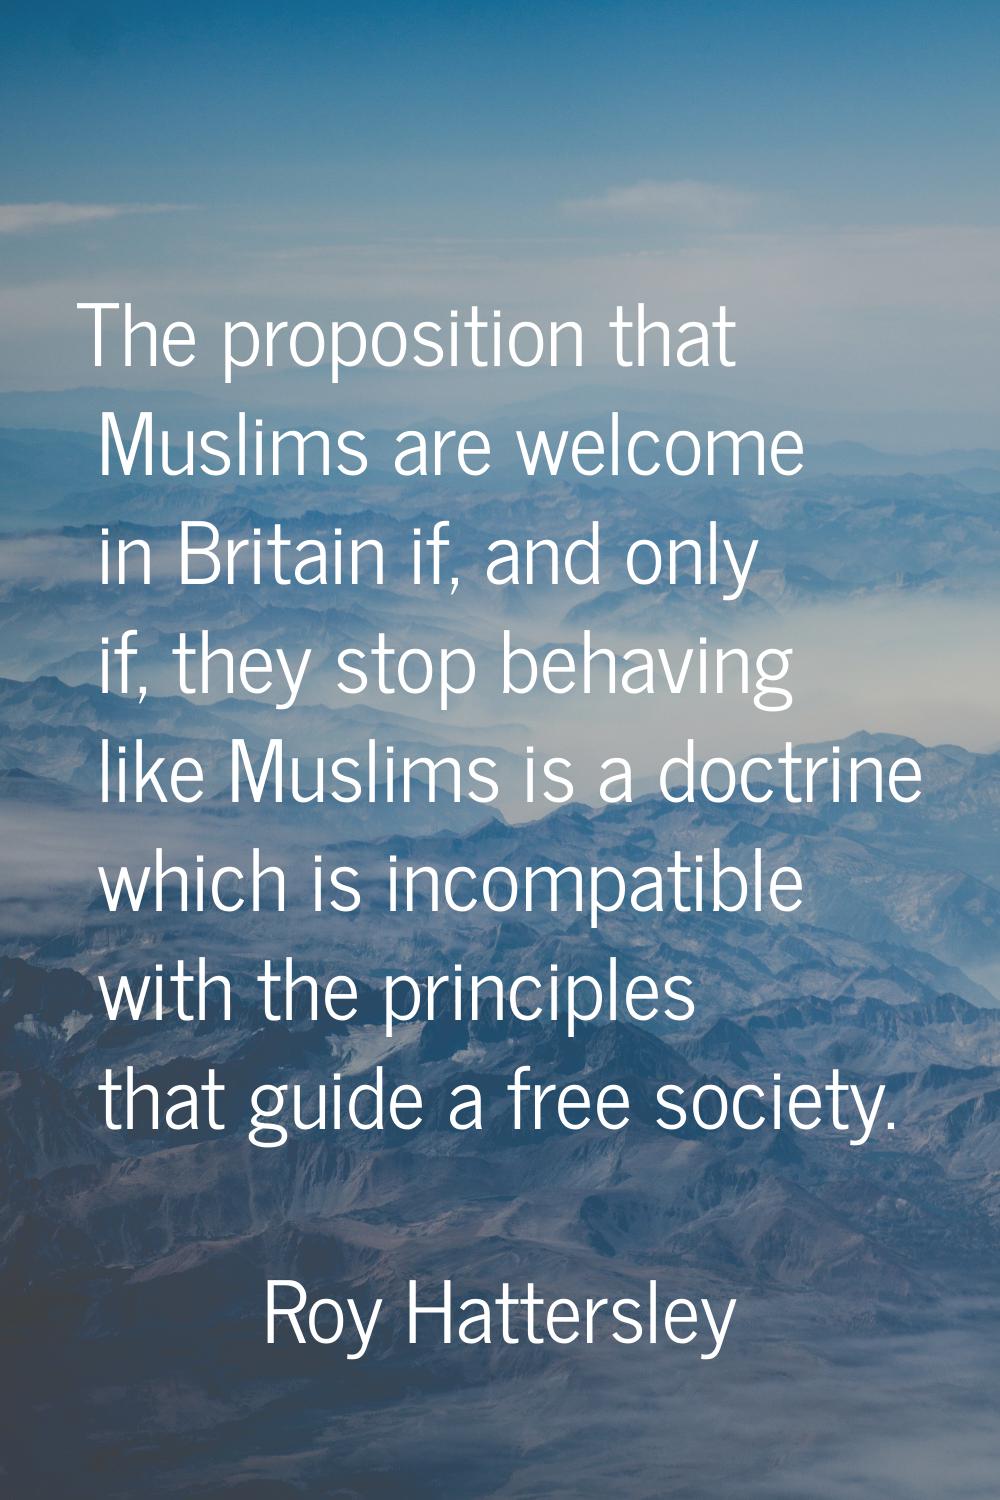 The proposition that Muslims are welcome in Britain if, and only if, they stop behaving like Muslim